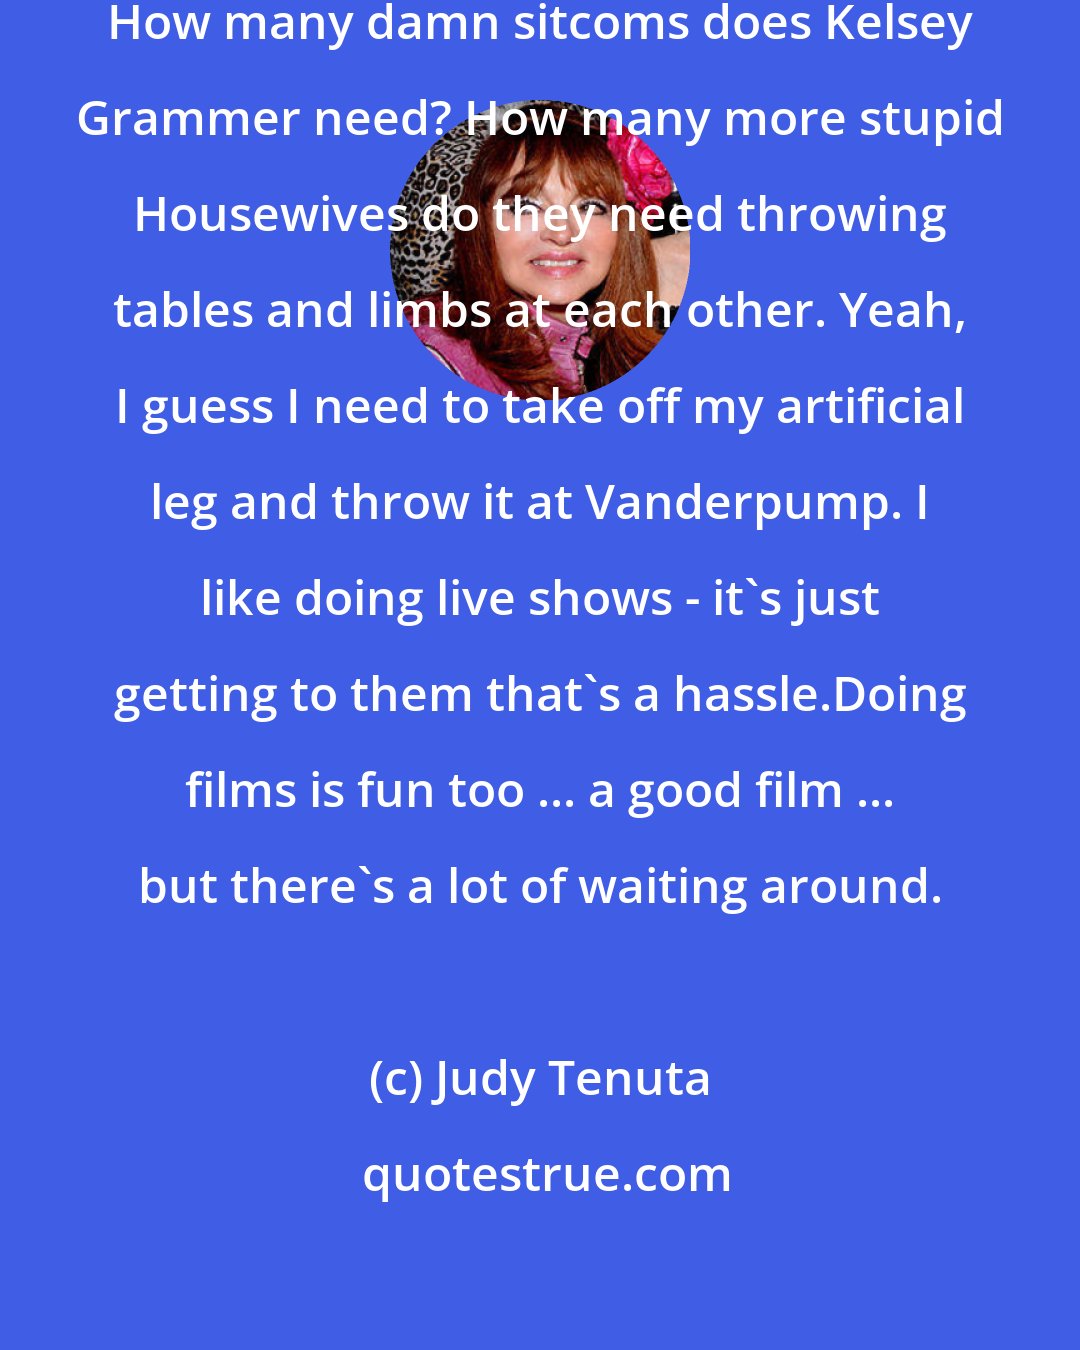 Judy Tenuta: I should have my own show by now. Yeah. How many damn sitcoms does Kelsey Grammer need? How many more stupid Housewives do they need throwing tables and limbs at each other. Yeah, I guess I need to take off my artificial leg and throw it at Vanderpump. I like doing live shows - it's just getting to them that's a hassle.Doing films is fun too ... a good film ... but there's a lot of waiting around.